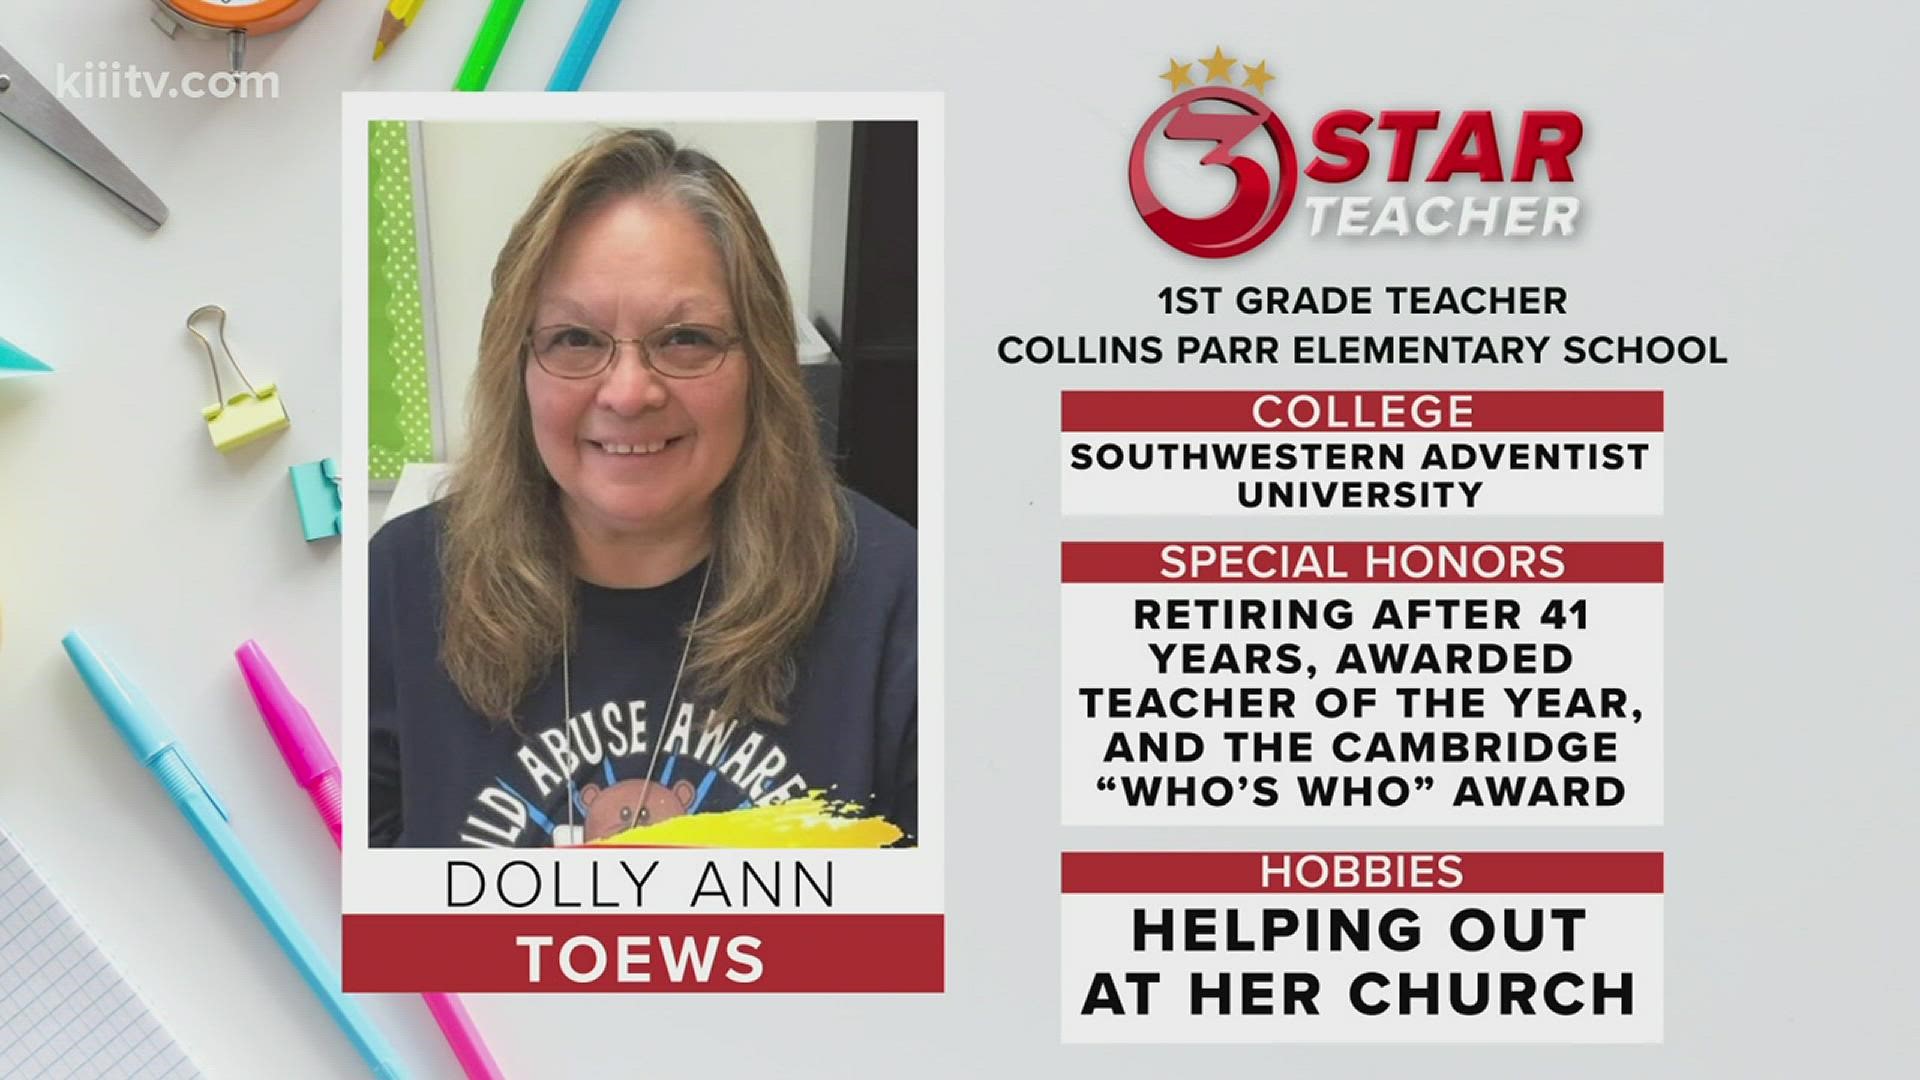 She was recently able to retire after more than 4 decades in the classroom! Thank you for all that you do!